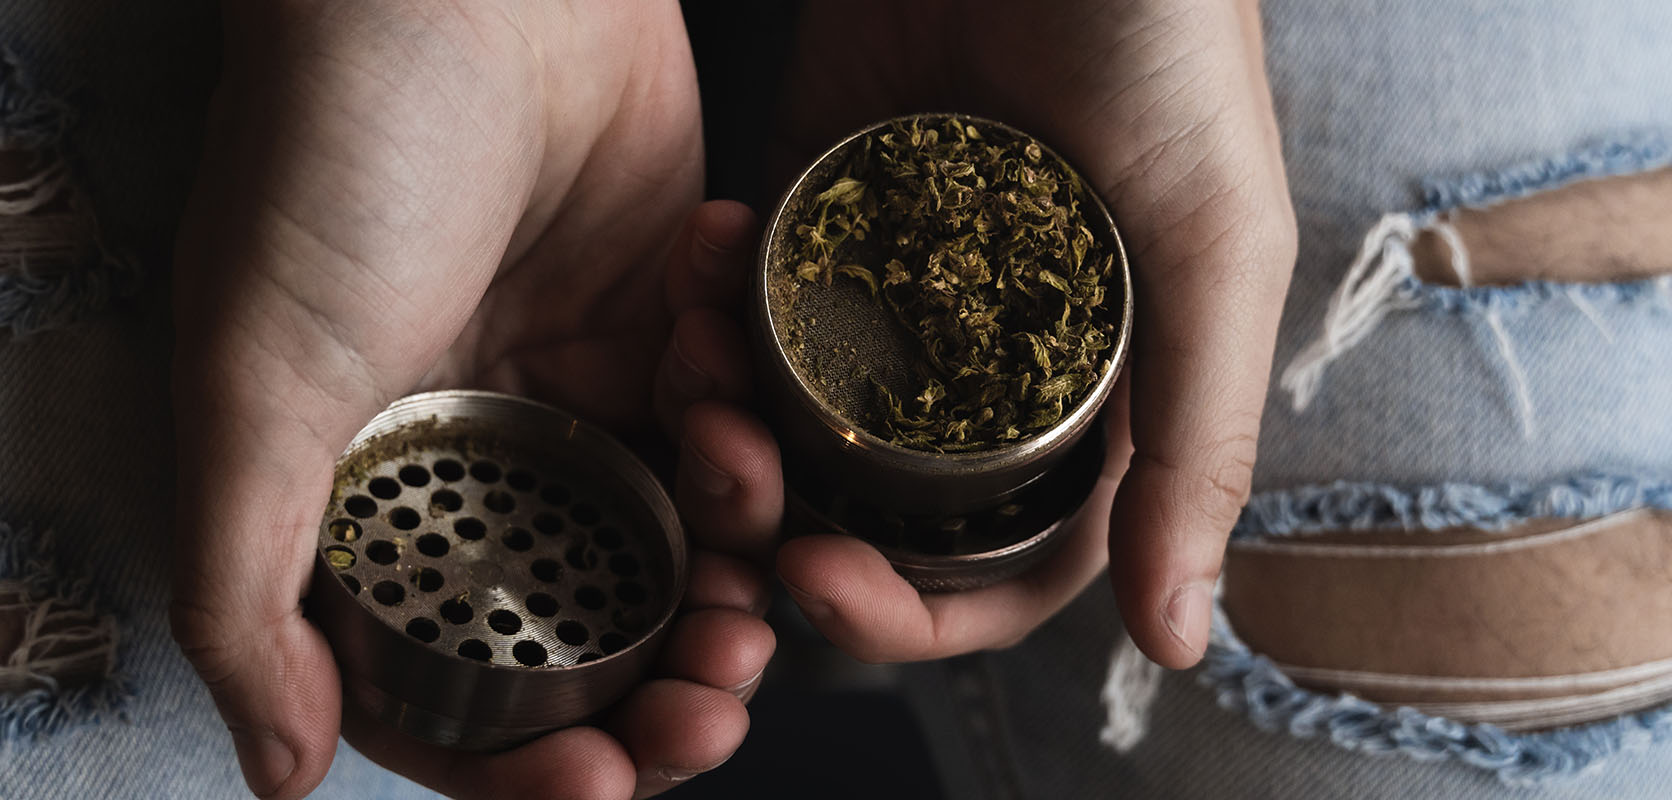 Man using a grinder to break up weed. Buy weed online from BC cannabis dispensary Low Price Bud. Value buds and cheapweed. Order weed online Canada.